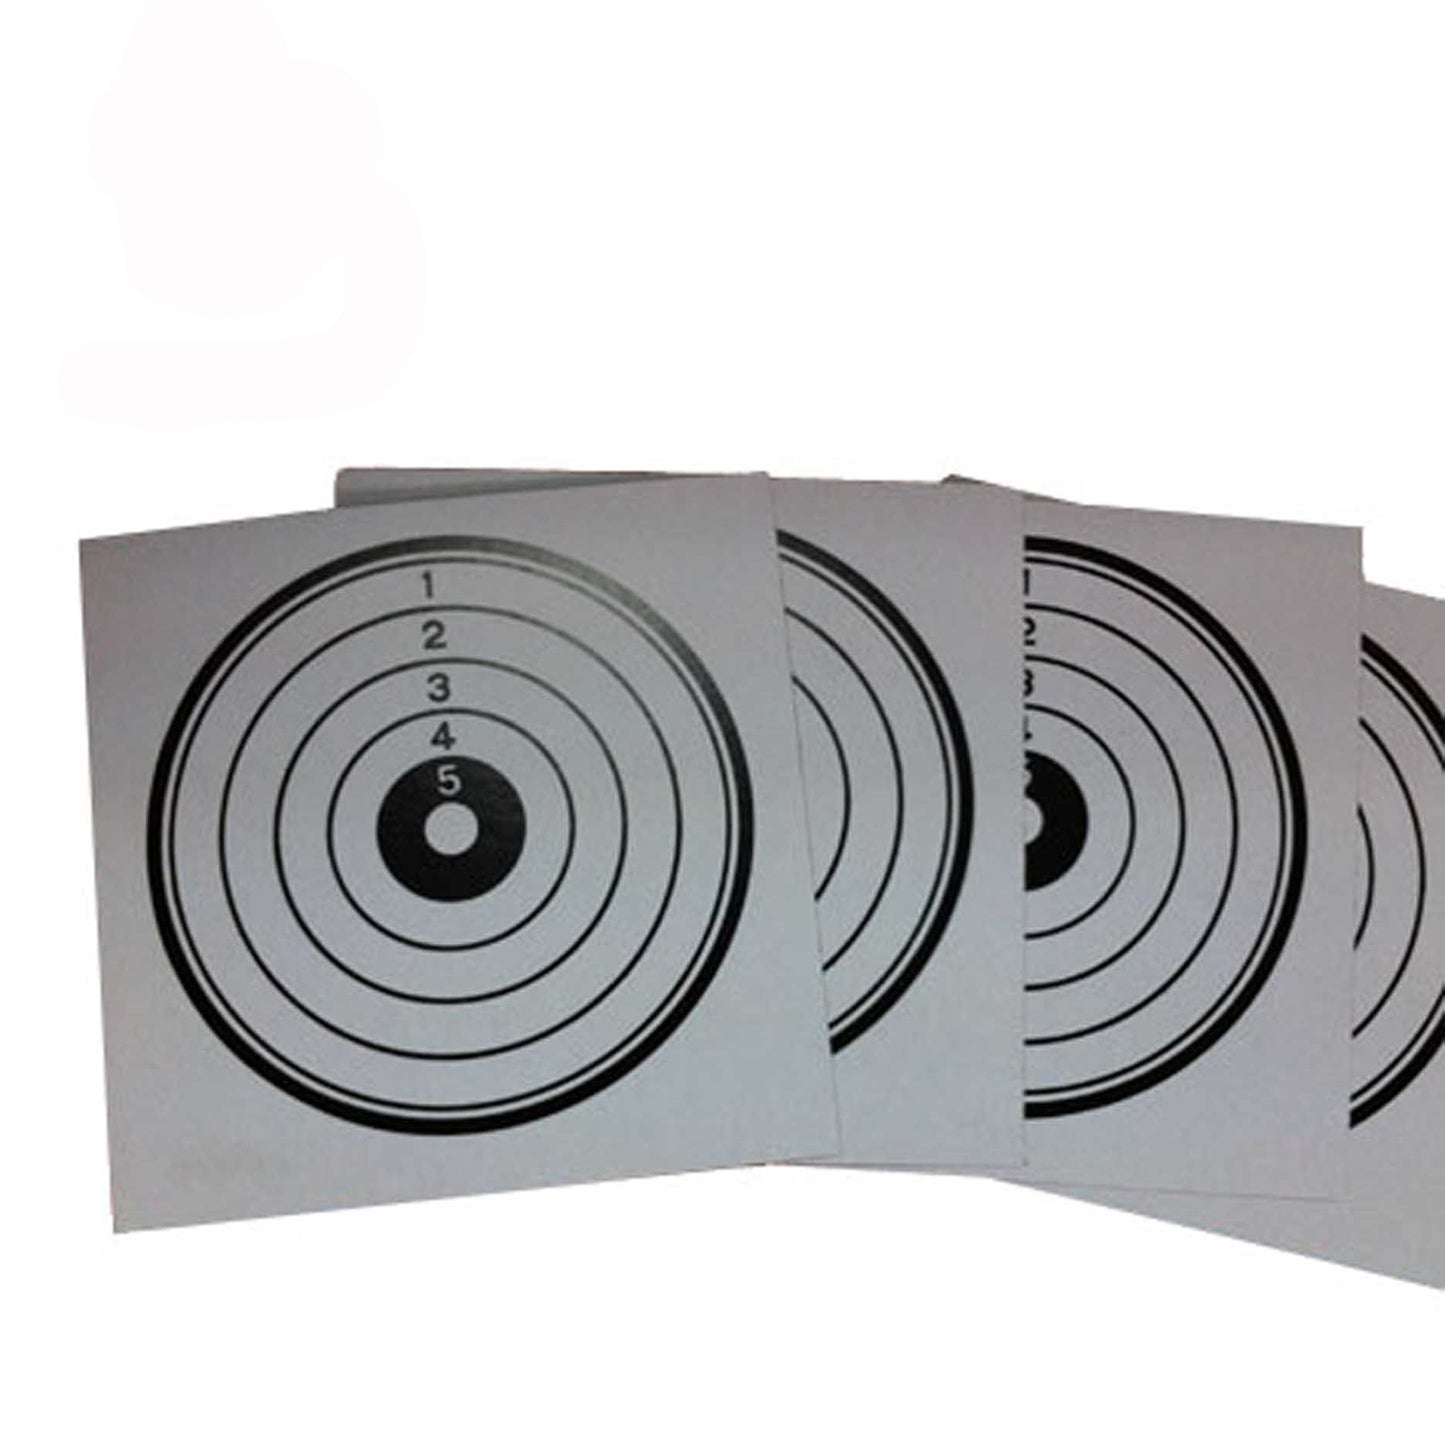 14*14cm 100pcs/bag Targeted Cone Trap Non Adhesive Cardboard Paper Shooting Targets